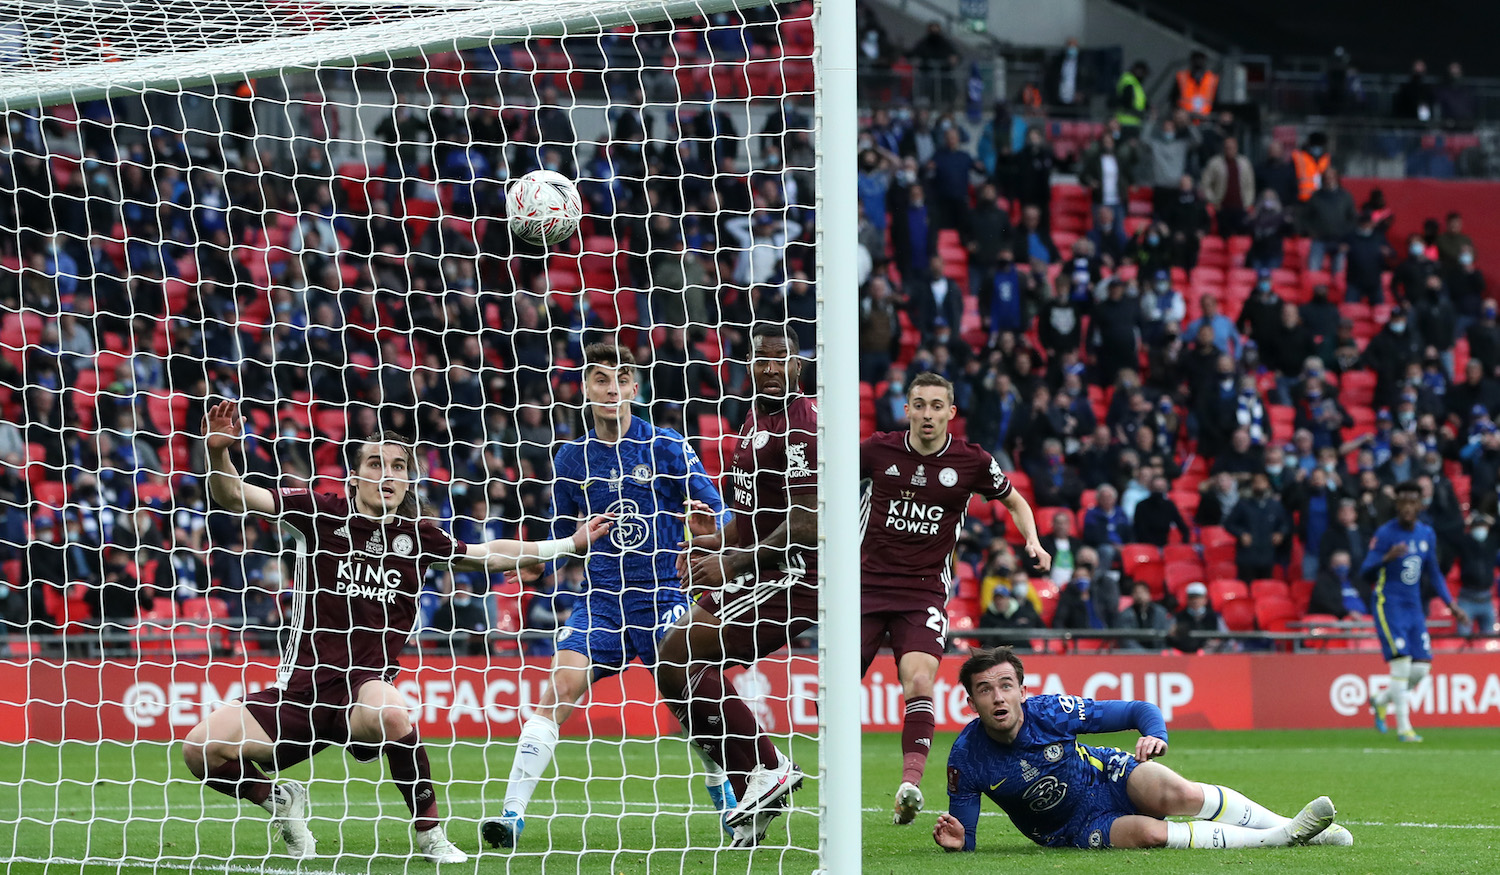 LONDON, ENGLAND - MAY 15: Ben Chilwell of Chelsea looks on after his effort is cleared by Caglar Soyuncu into Wes Morgan of Leicester City resulting in a goal that was later ruled out by VAR for offside during The Emirates FA Cup Final match between Chelsea and Leicester City at Wembley Stadium on May 15, 2021 in London, England. A limited number of around 21,000 fans, subject to a negative lateral flow test, will be allowed inside Wembley Stadium to watch this year's FA Cup Final as part of a pilot event to trial the return of large crowds to UK venues. (Photo by Nick Potts - Pool/Getty Images)